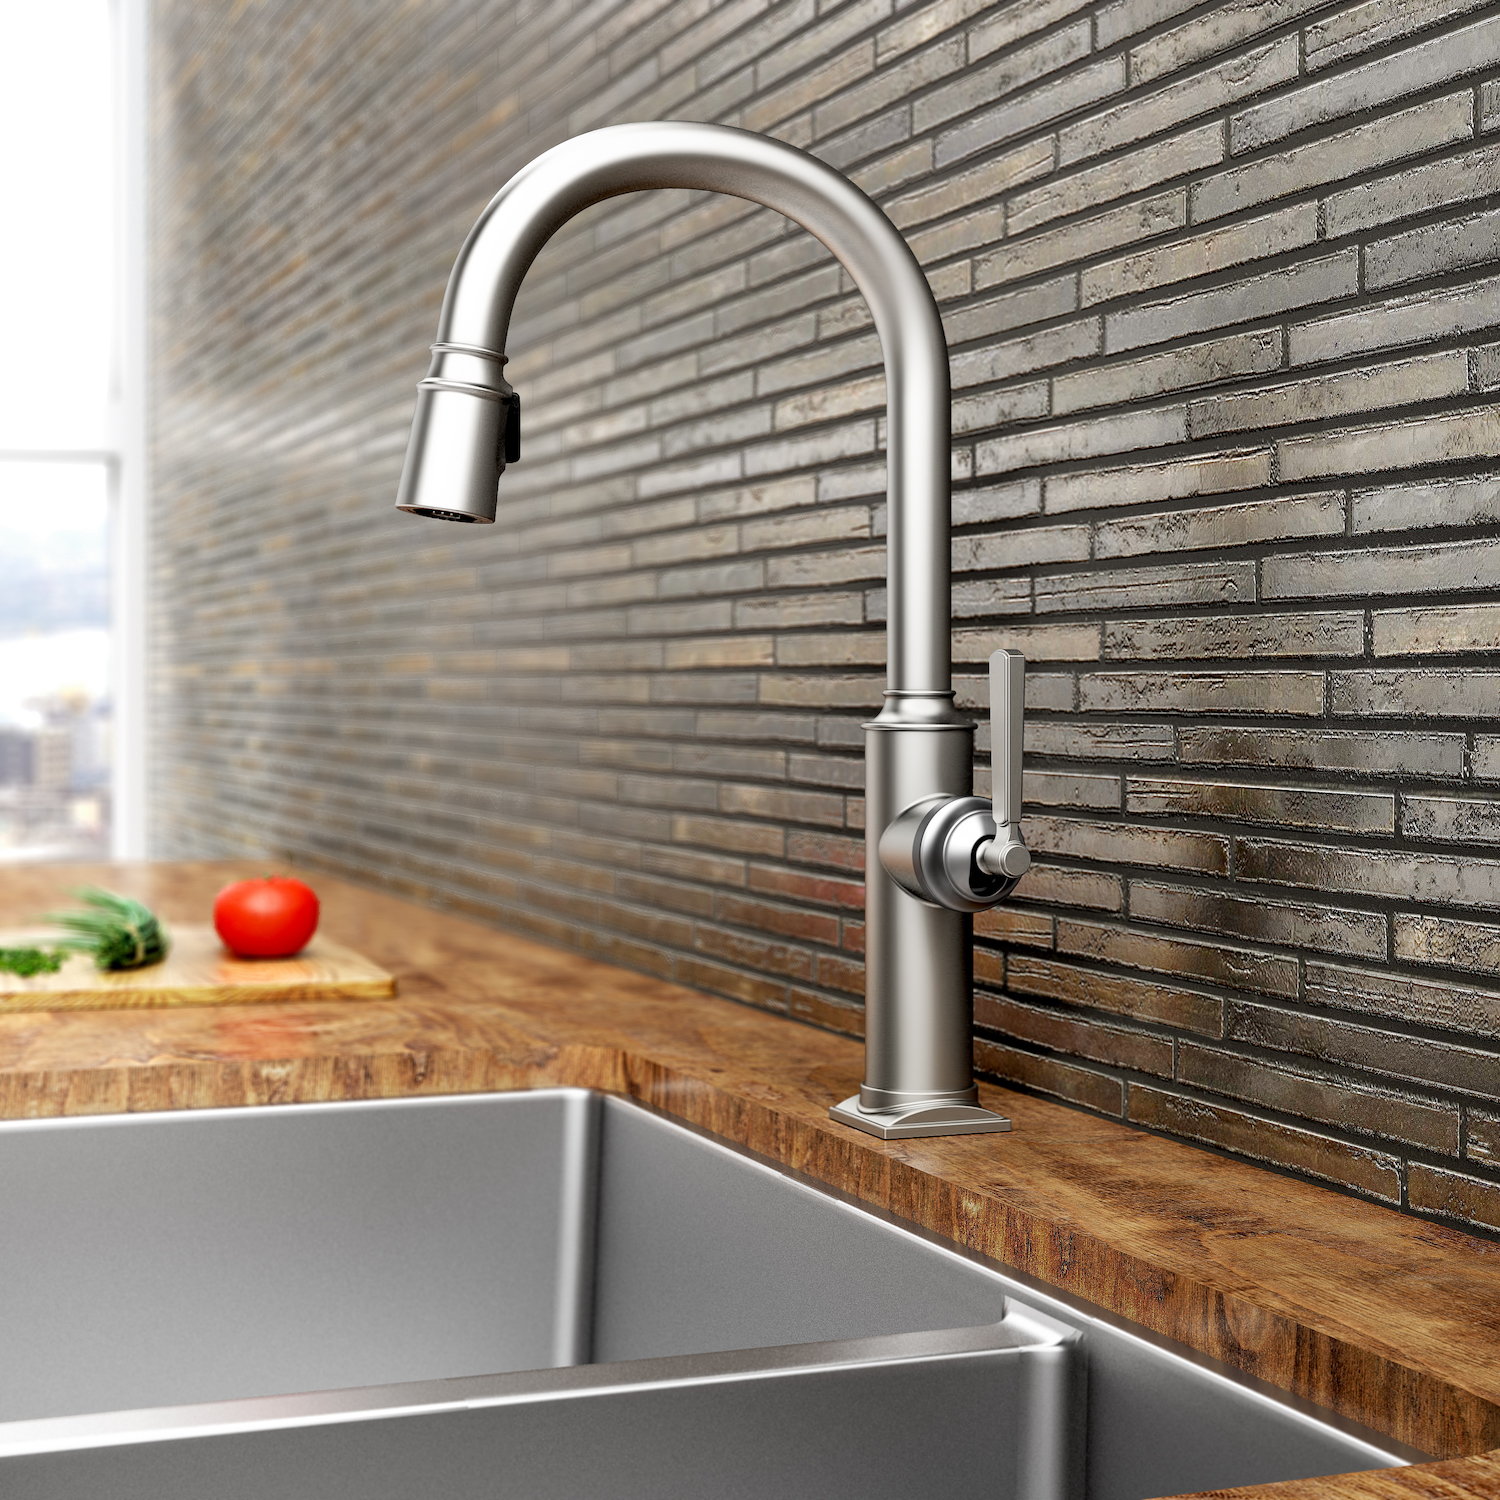 Newport Brass Adds Three New Kitchen Faucet Collections Residential Products Online